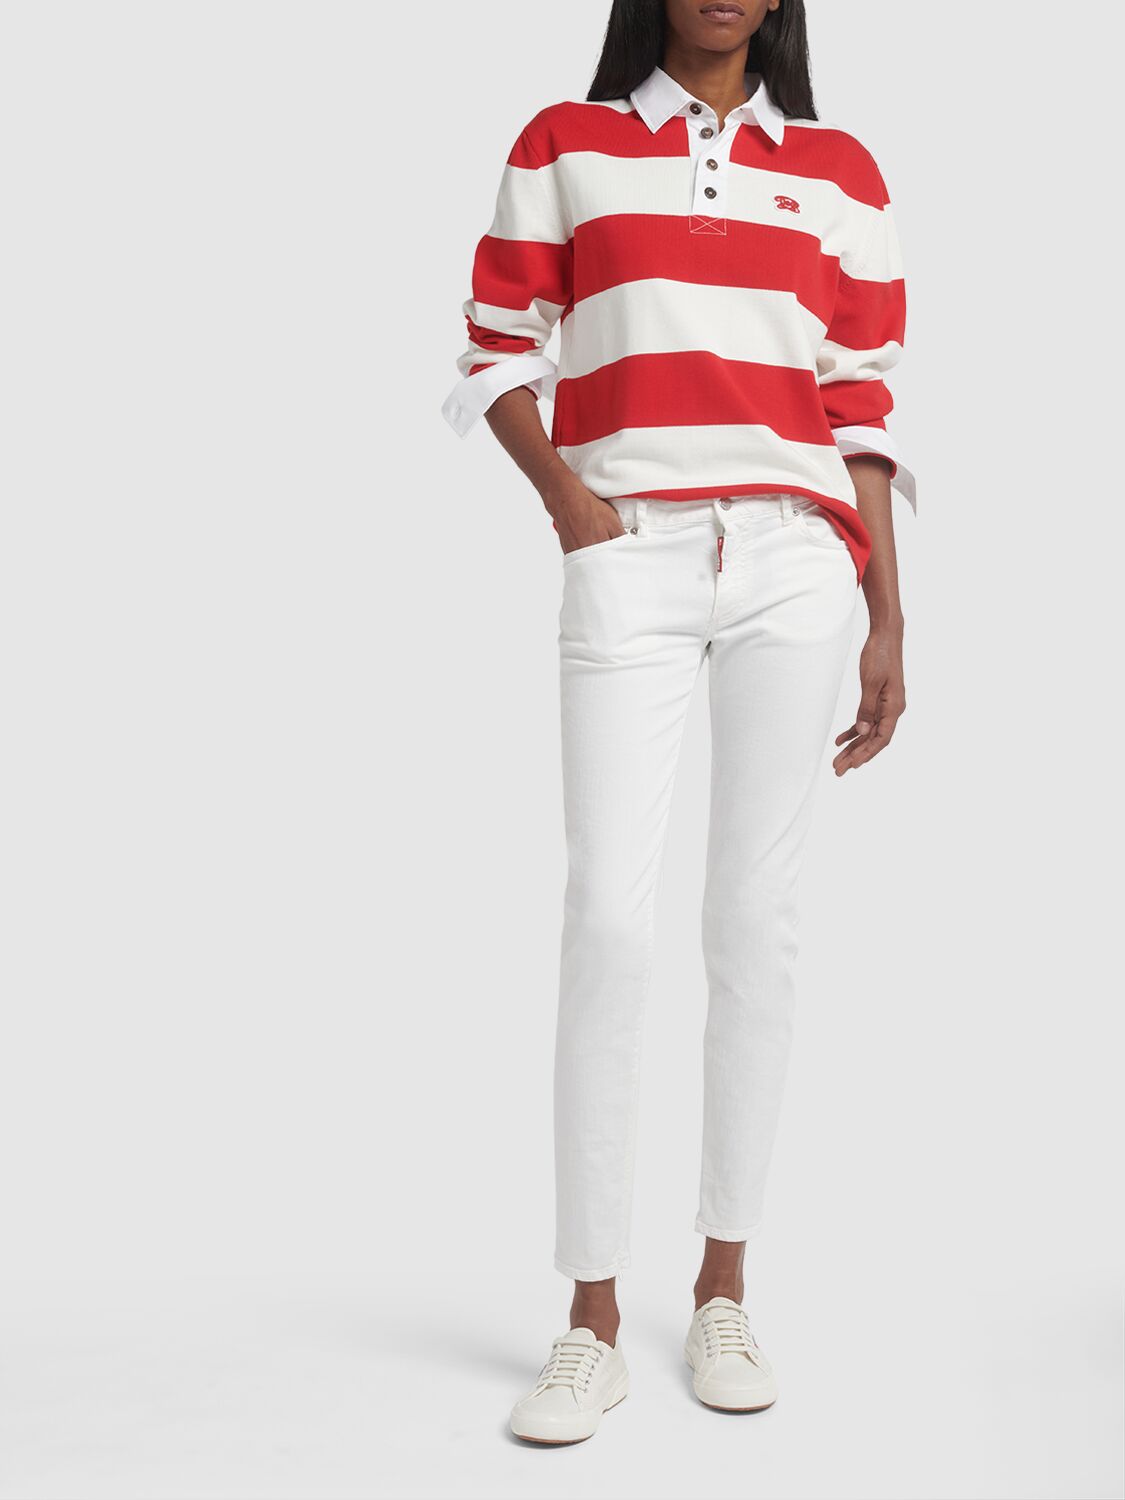 Shop Dsquared2 Twiggy Low Rise Denim Skinny Jeans In White